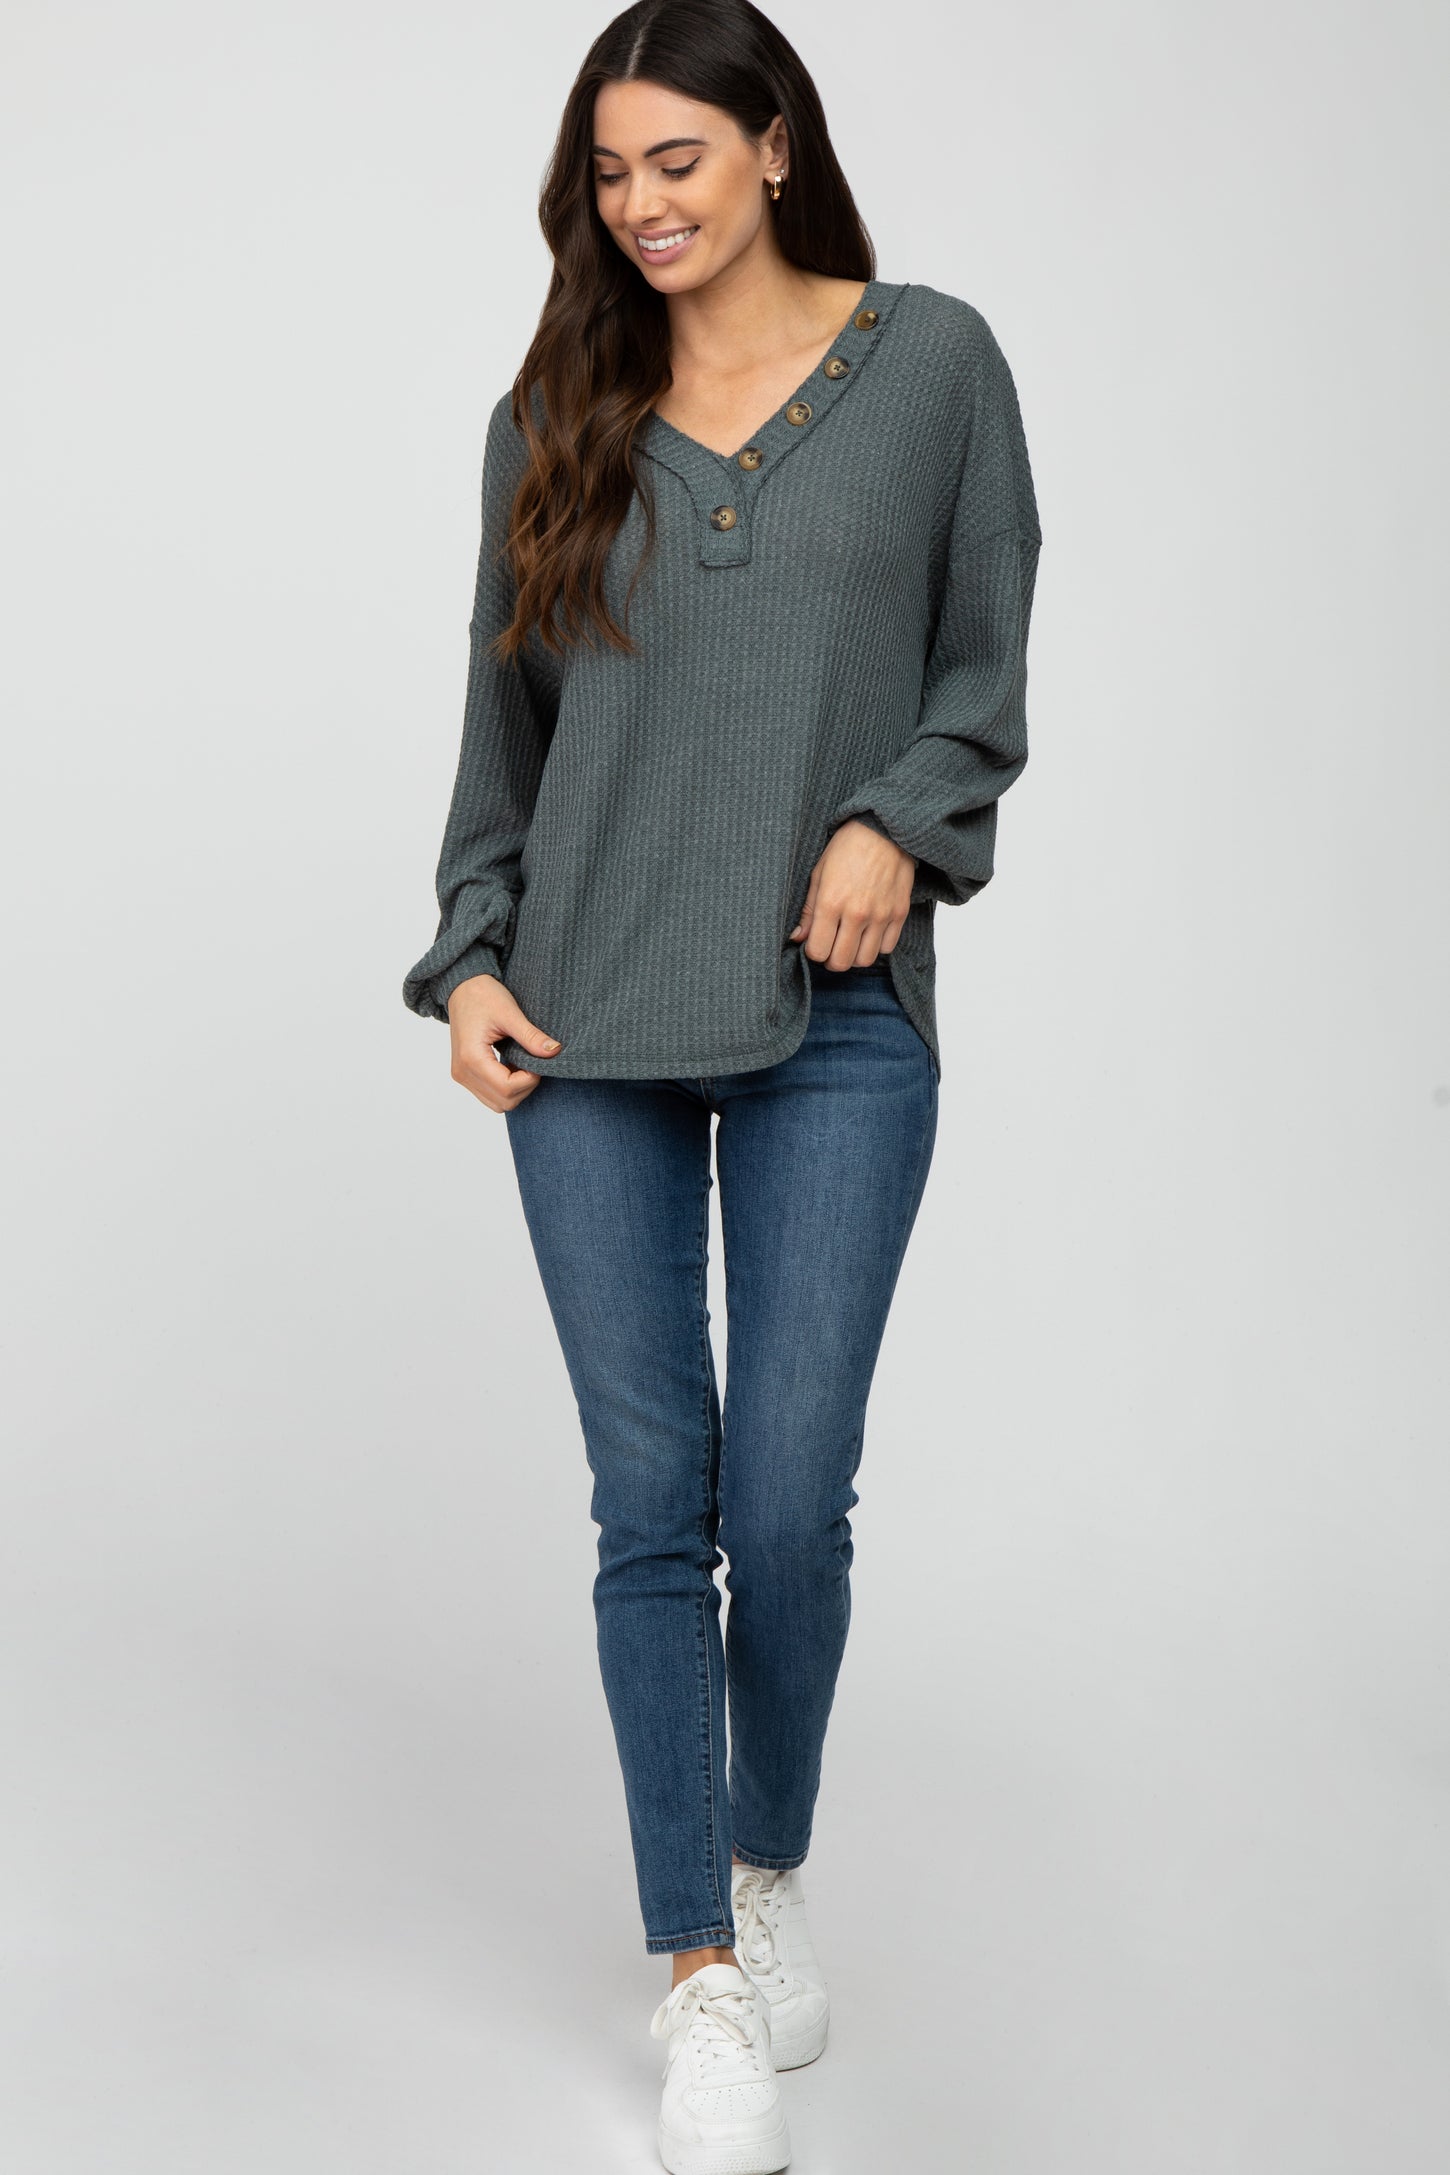 Teal Waffle Knit Button Accent Top